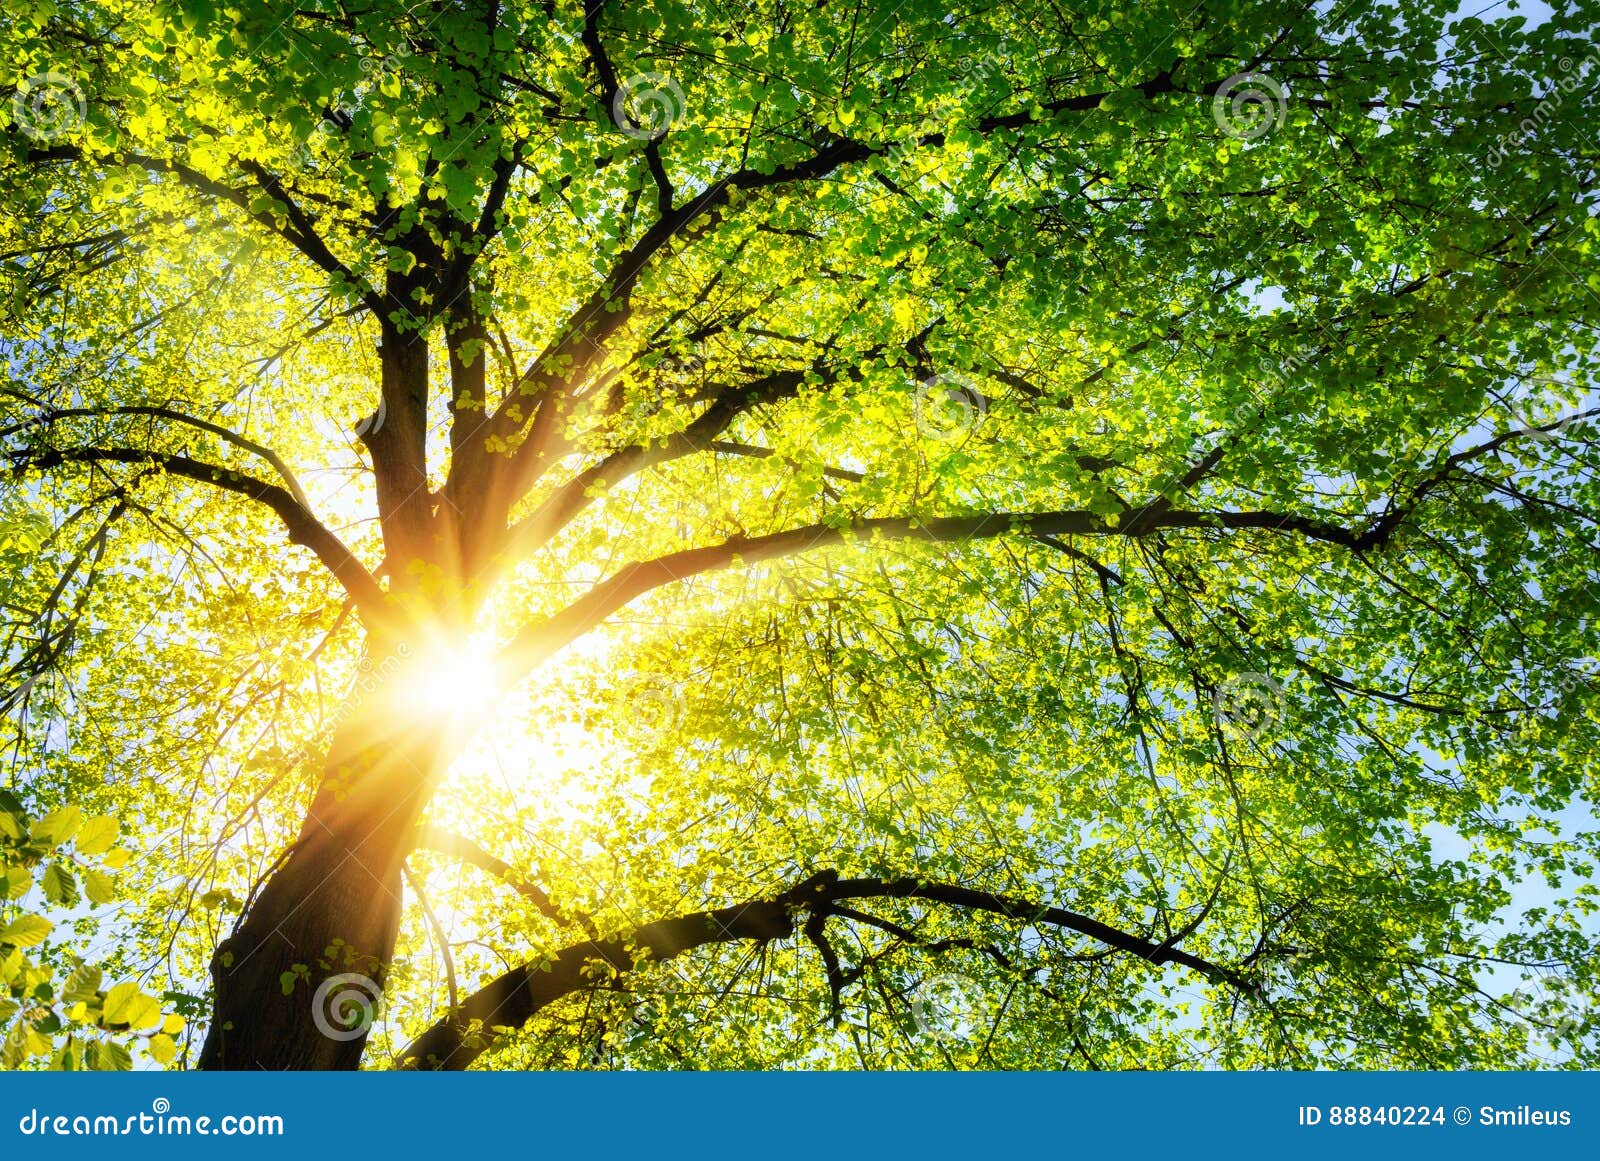 The Sun Shining through the Branches of a Tree Stock Photo - Image of